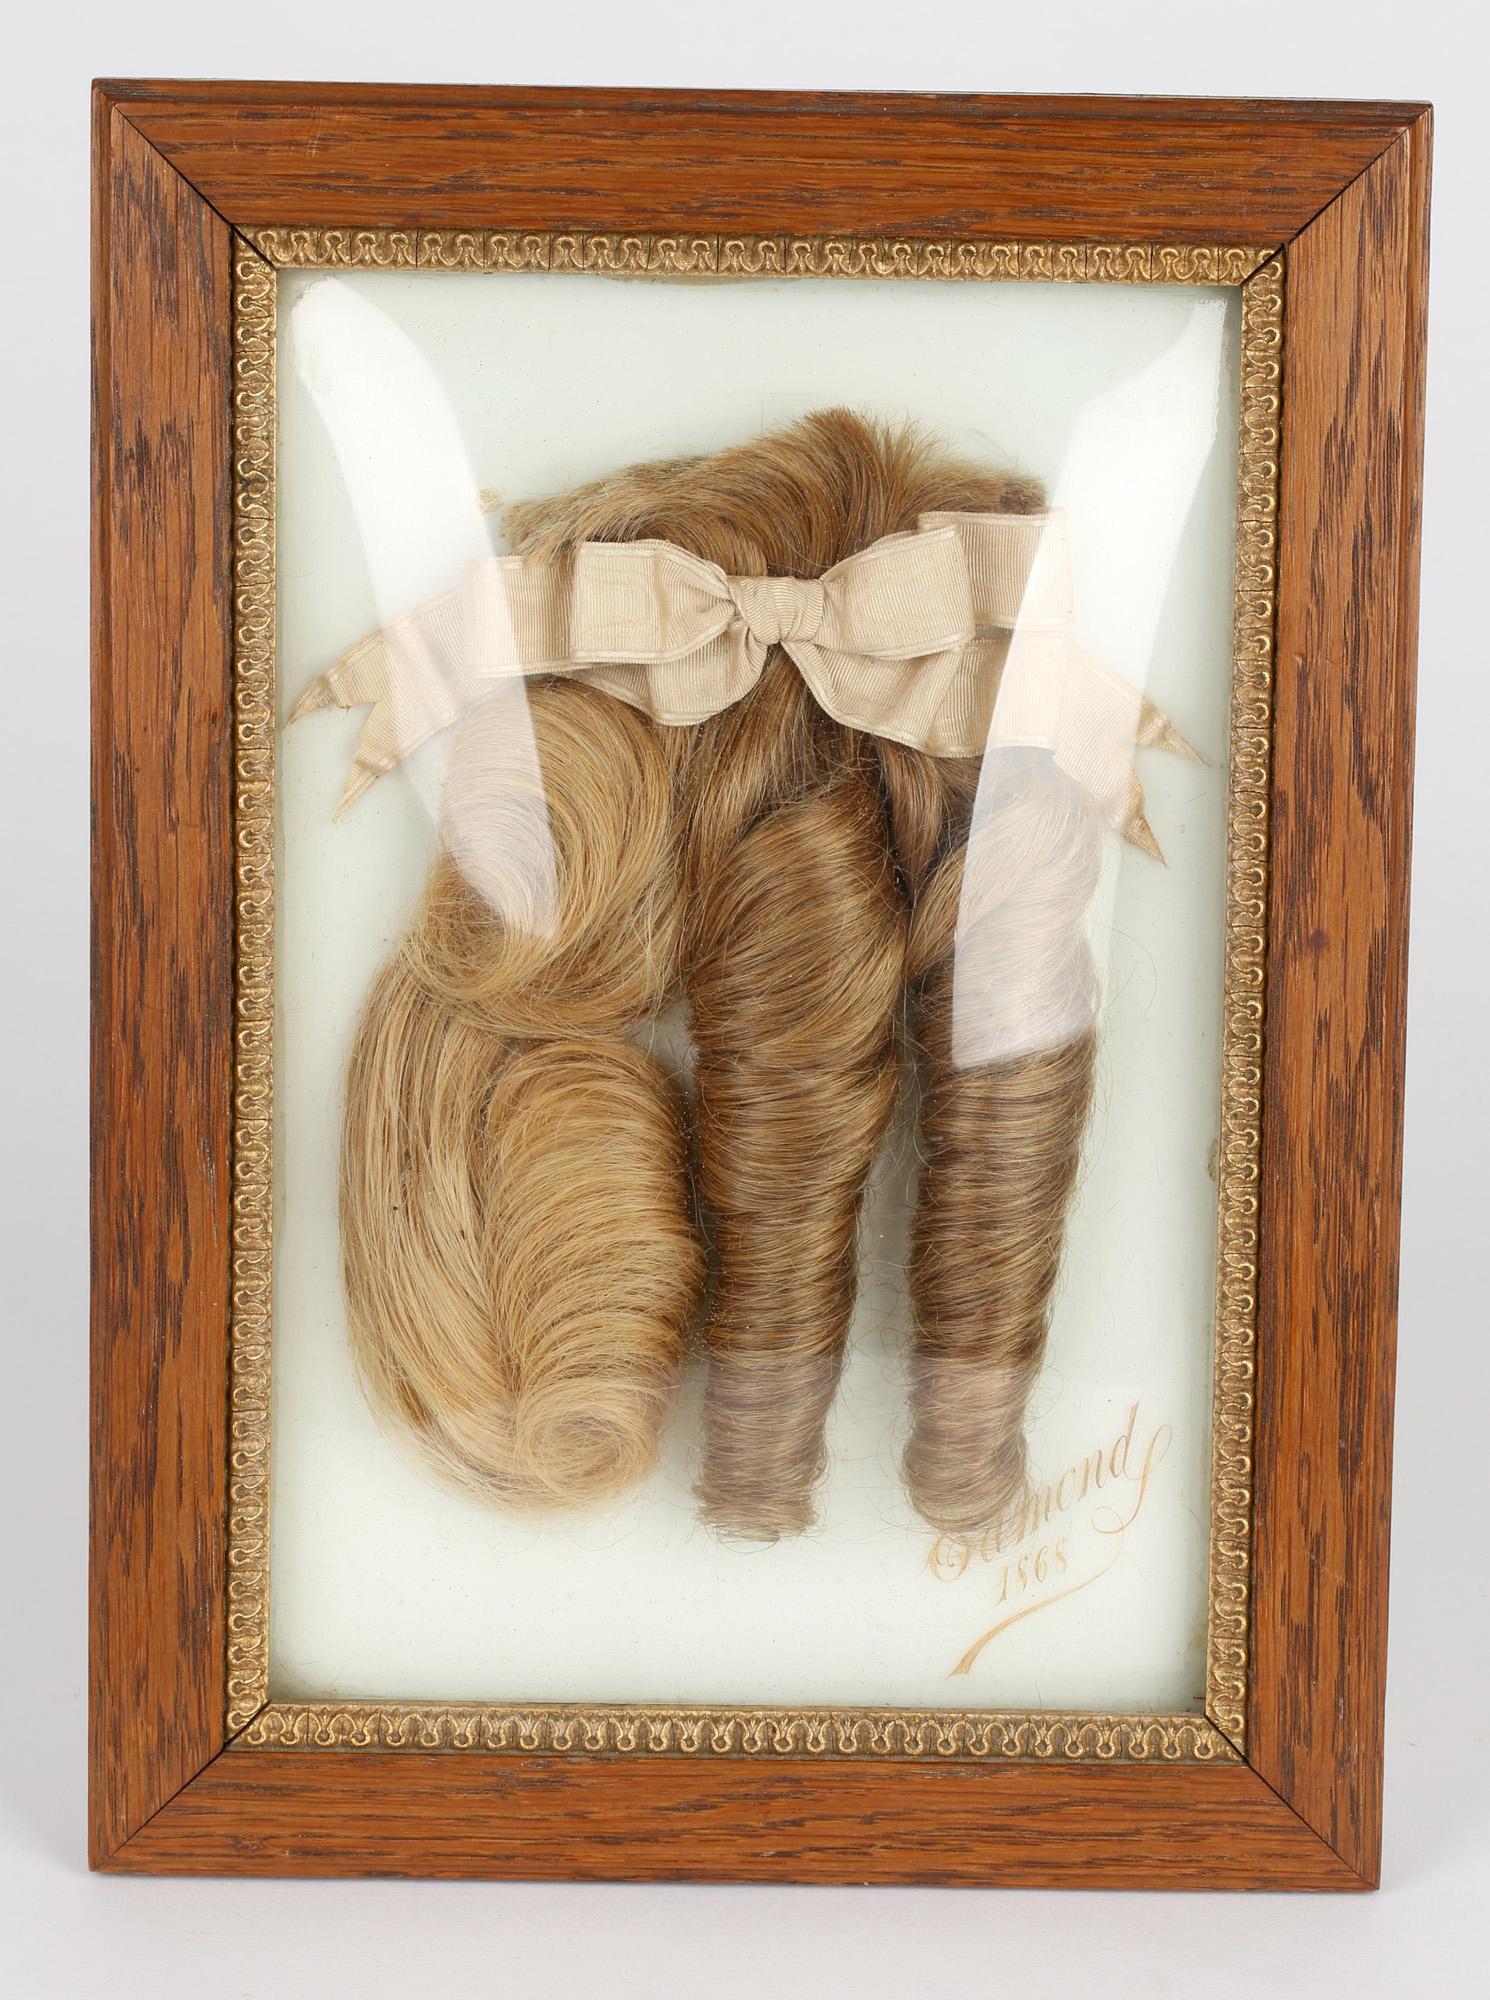 Unusual and rare French Parisian hairdressers advertising framed hair display marked Edmonds and dated 1868. Of hairdresser interest the hand crafted oak frame has a bow glass front and displays three locks of hair tied with a silk ribbon and set